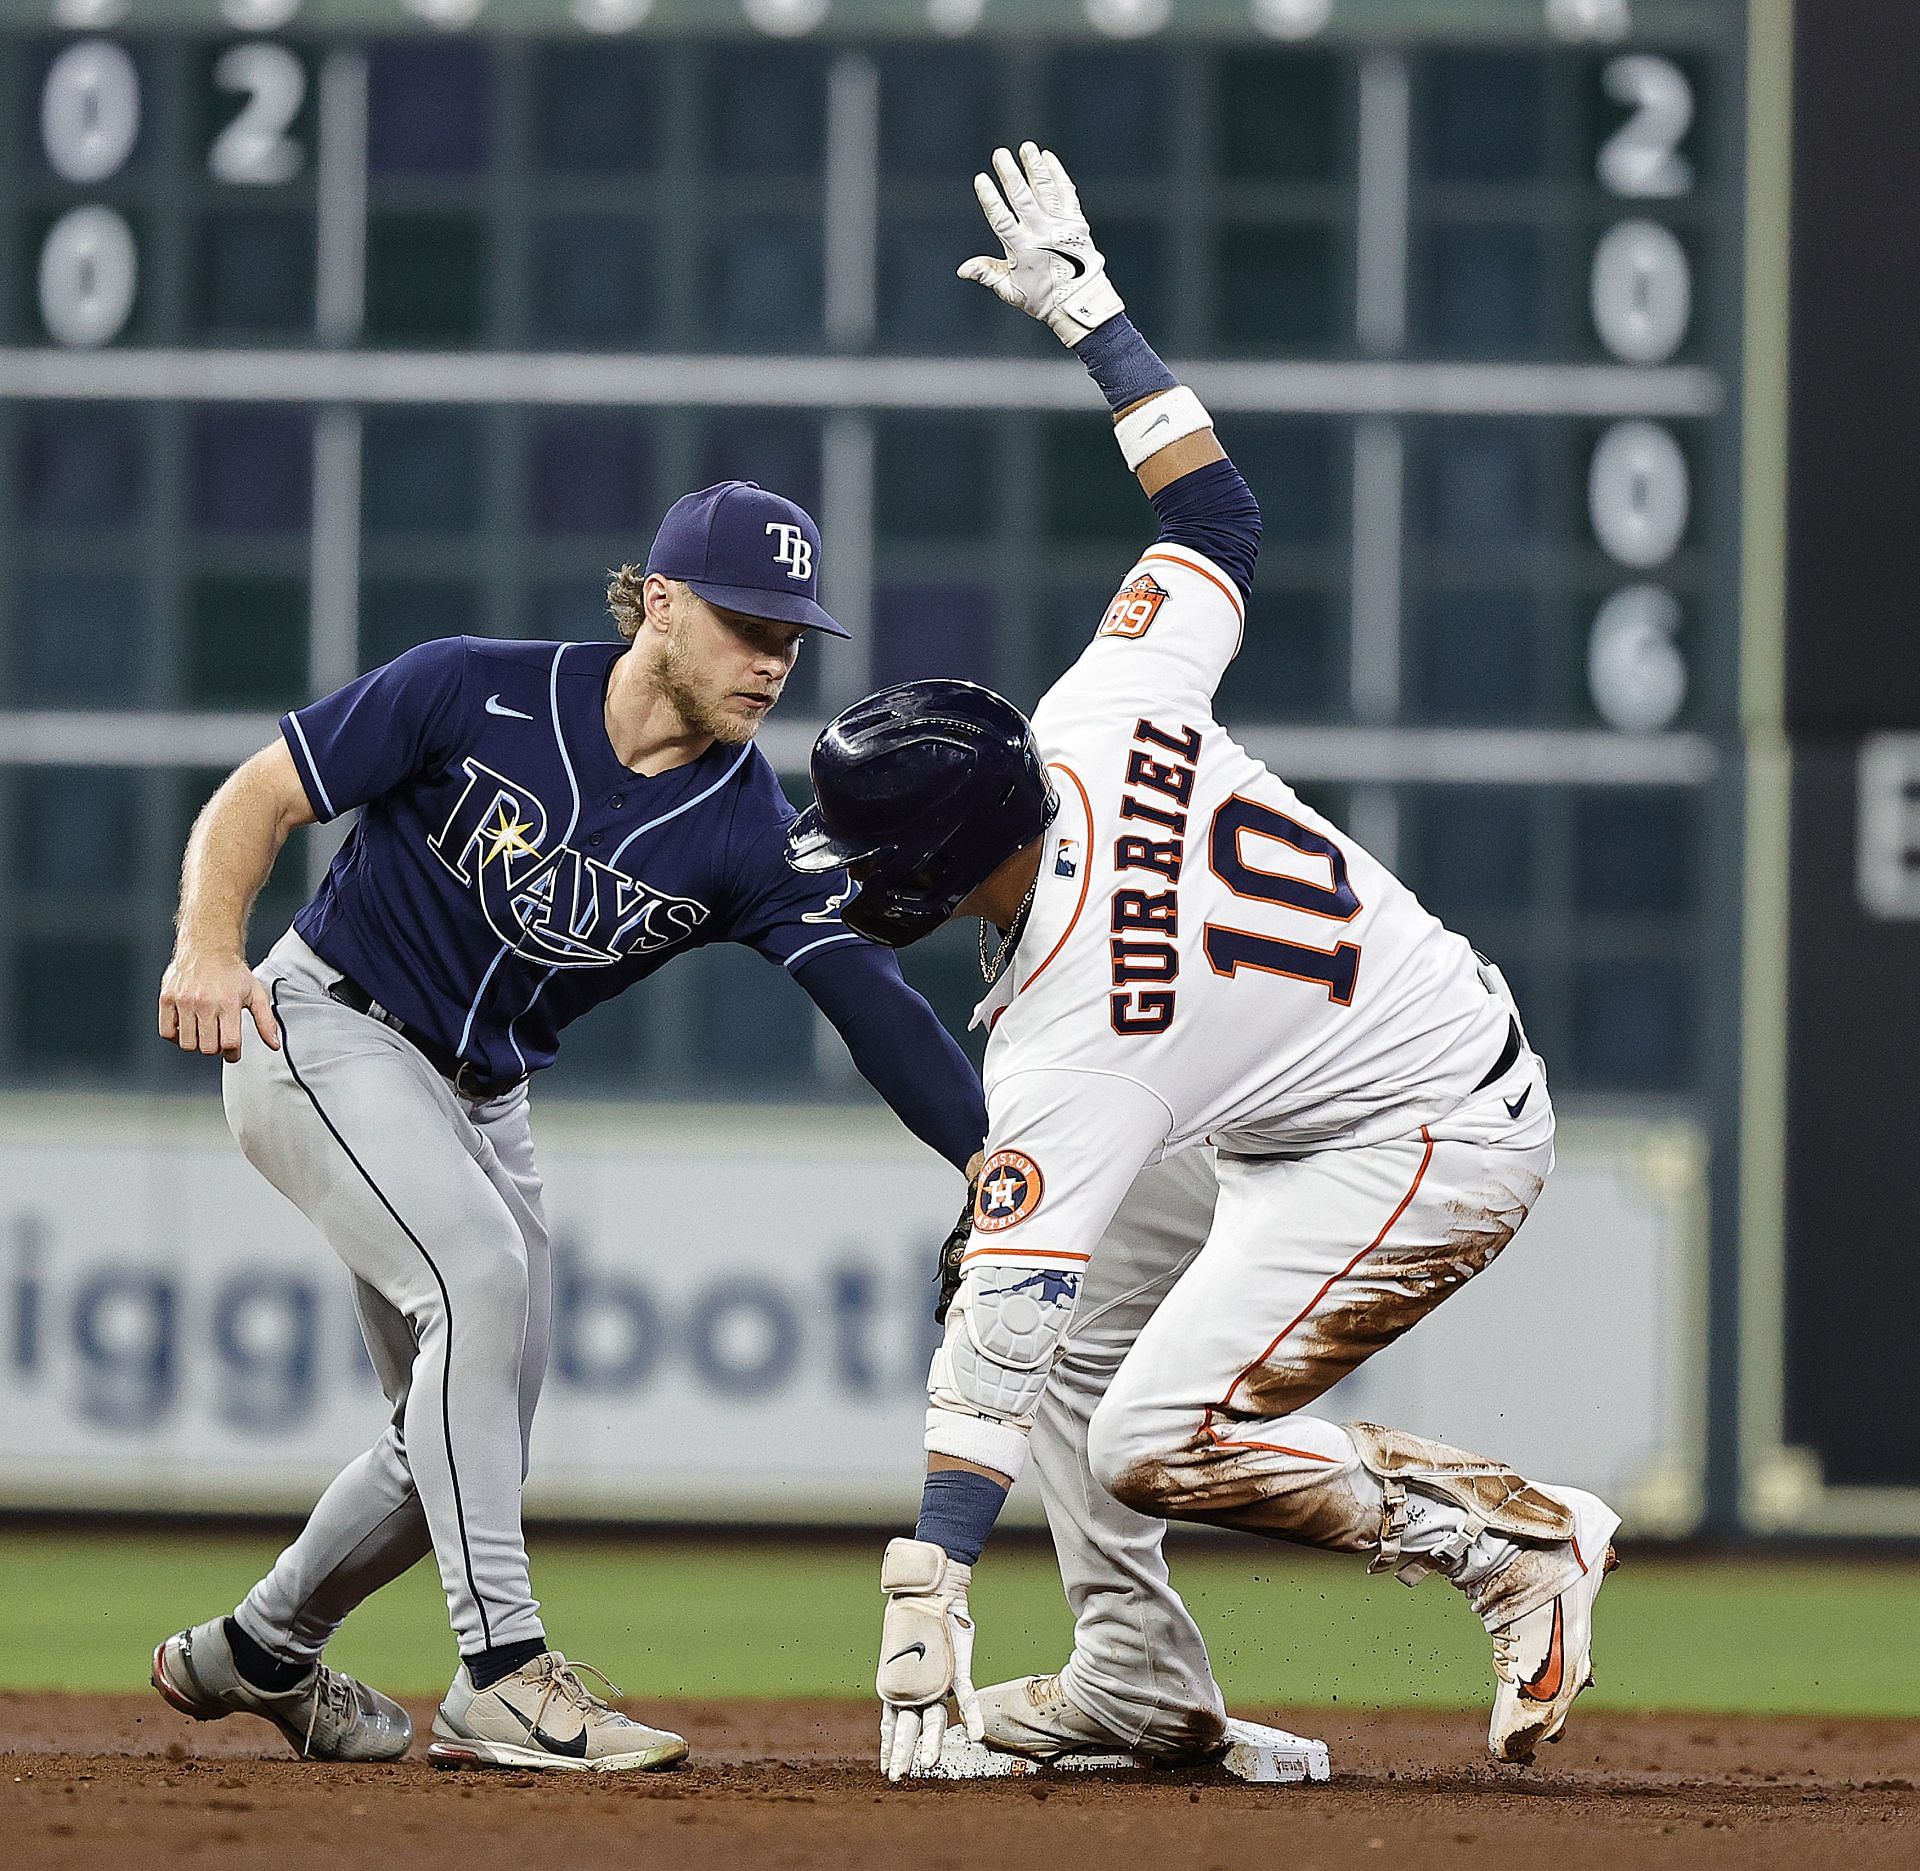 Houston Astros 2022 MLB season preview, odds, and predictions